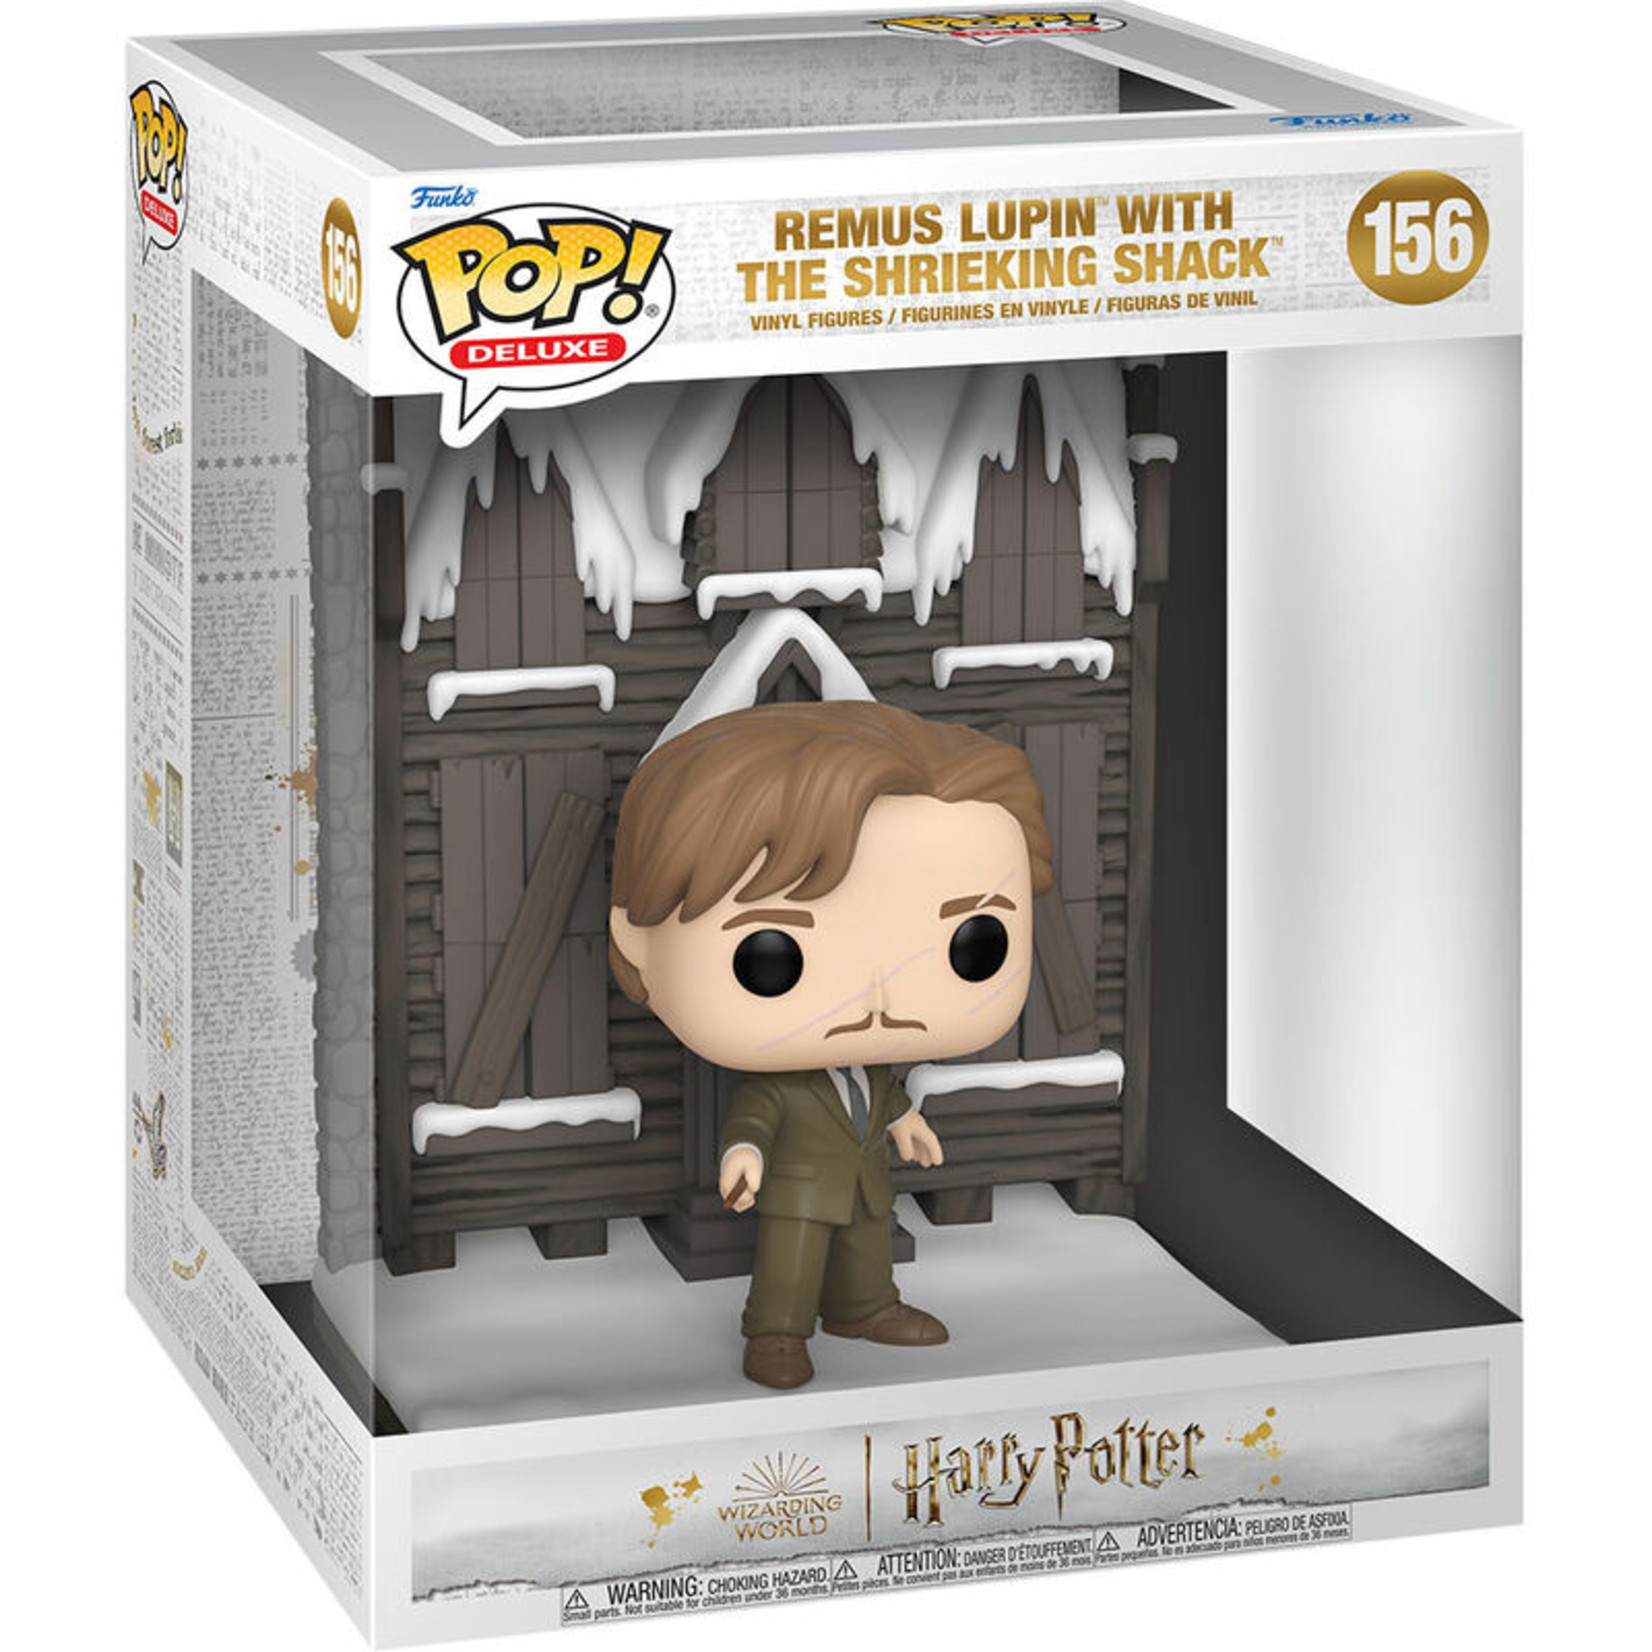 Funko Funko POP! Deluxe Harry Potter Remus Lupin with The Shrieking Shack